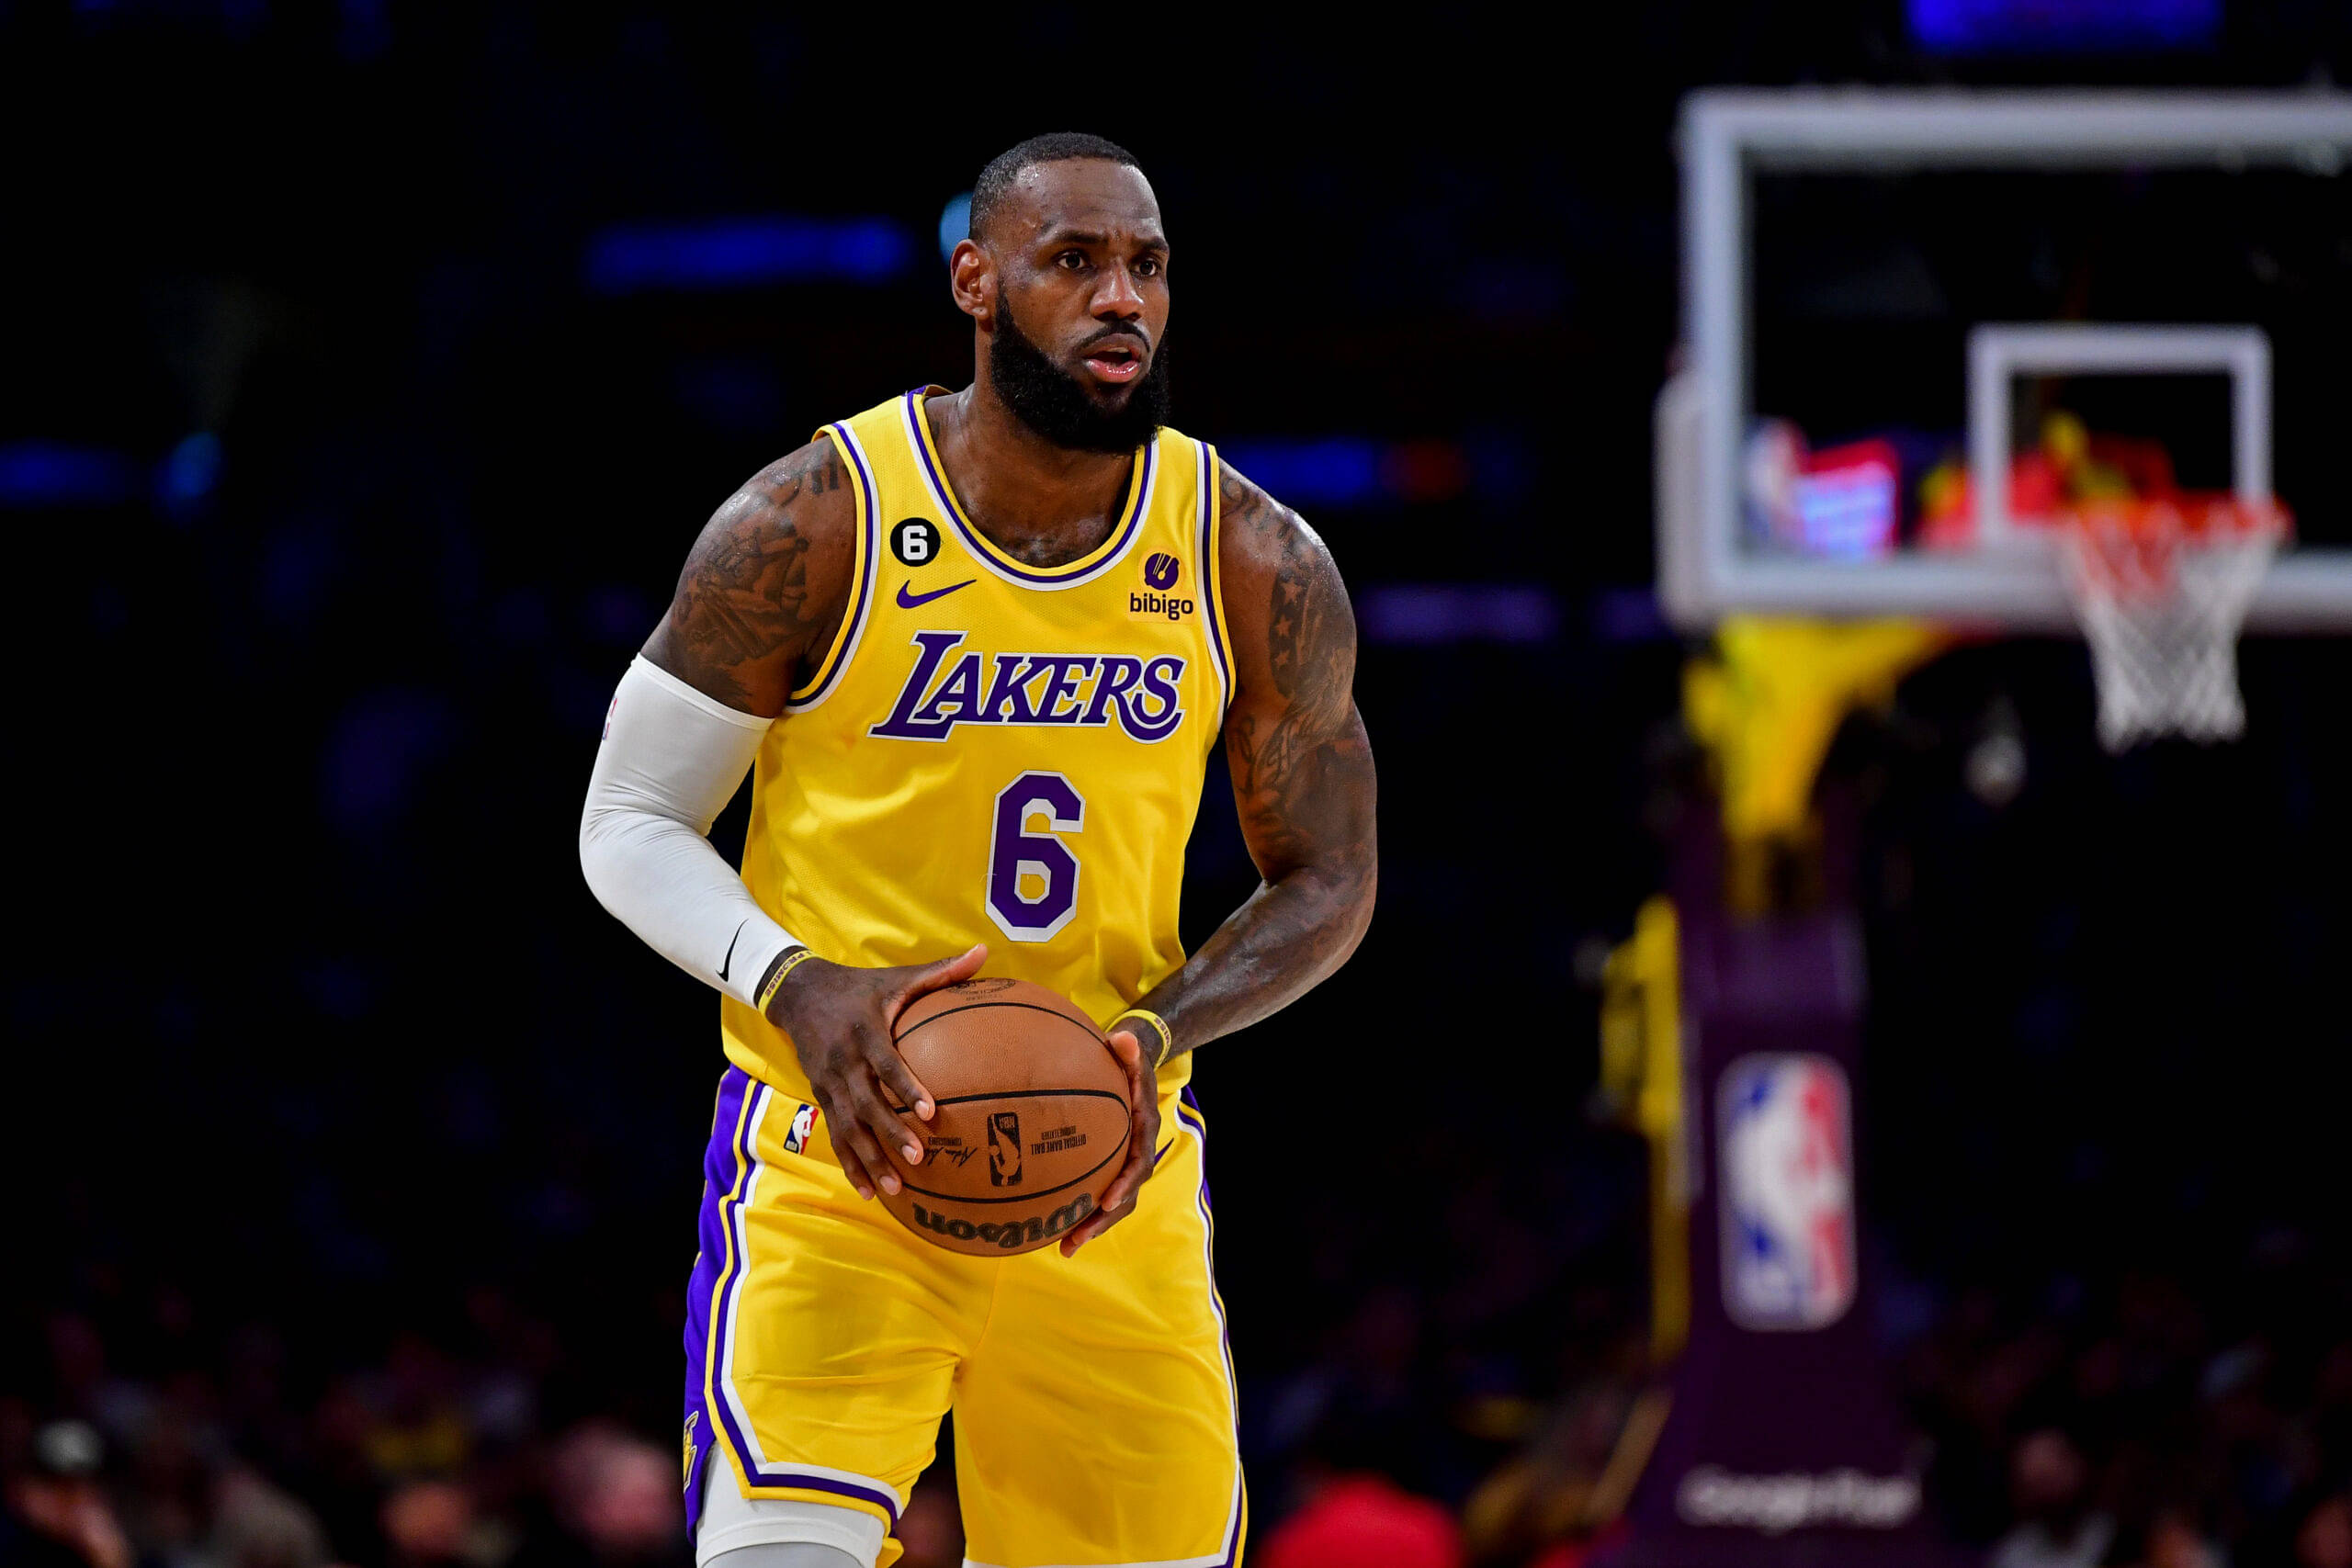 Gamer: LeBron appearing on cover of NBA 2K video game